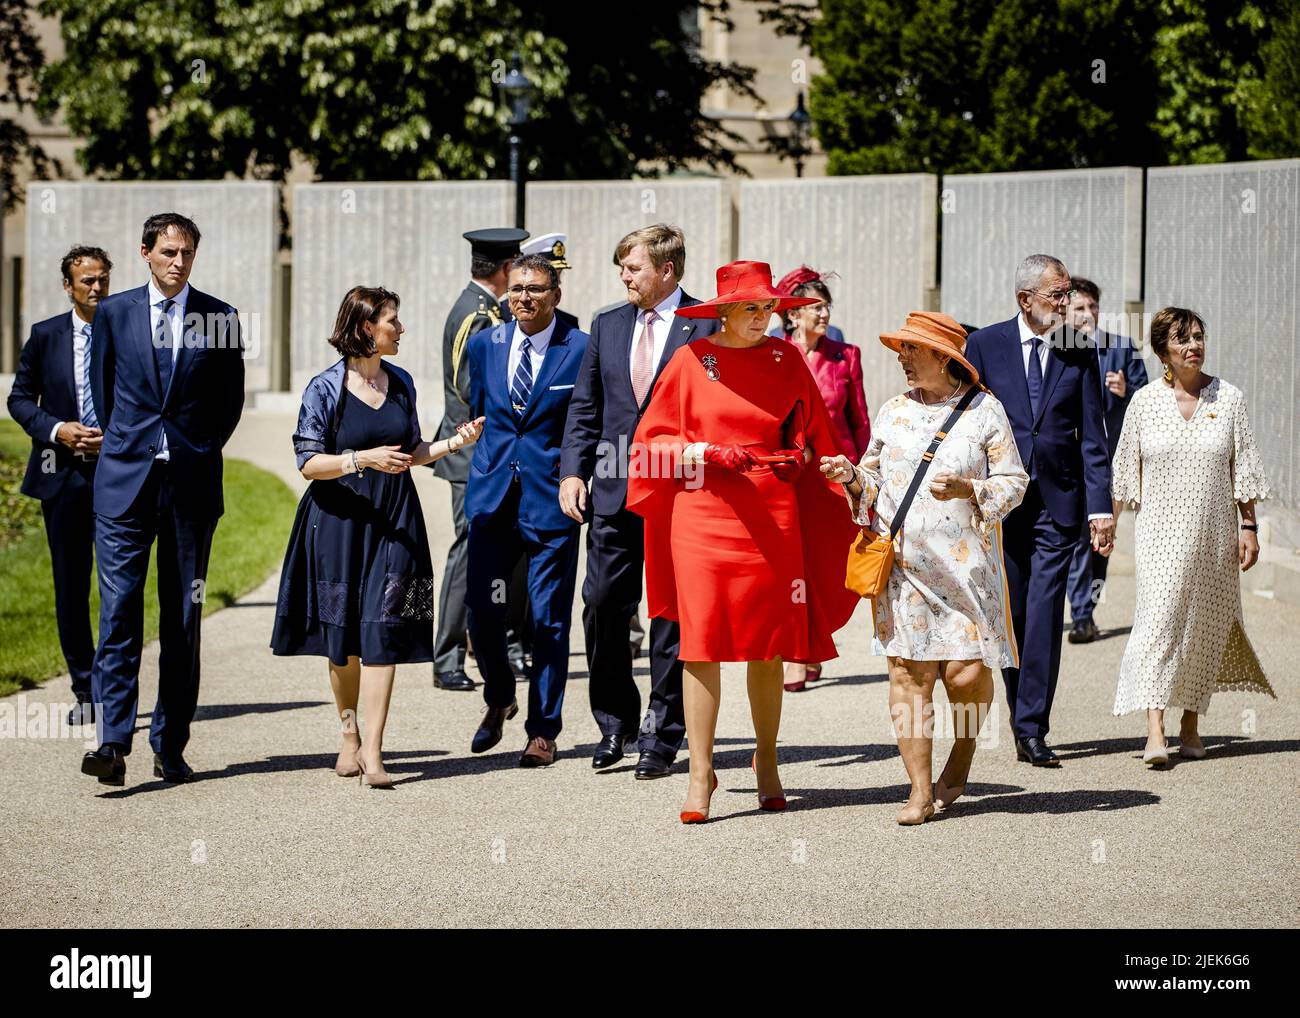 Austria. 2022-06-27 15:01:22 VIENNA - Foreign Minister Wopke Hoekstra, King Willem-Alexander, Queen Maxima, Federal President Alexander Van der Bellen and Doris Schmidauer at the Namenmonument, which is dedicated to the victims of the Holocaust, during a three-day state visit to Austria. Central to the visit are the themes of sustainable mobility, the connected society and cultural exchange. ANP SEM VAN DER WAL netherlands out - belgium out Credit: ANP/Alamy Live News Credit: ANP/Alamy Live News Stock Photo